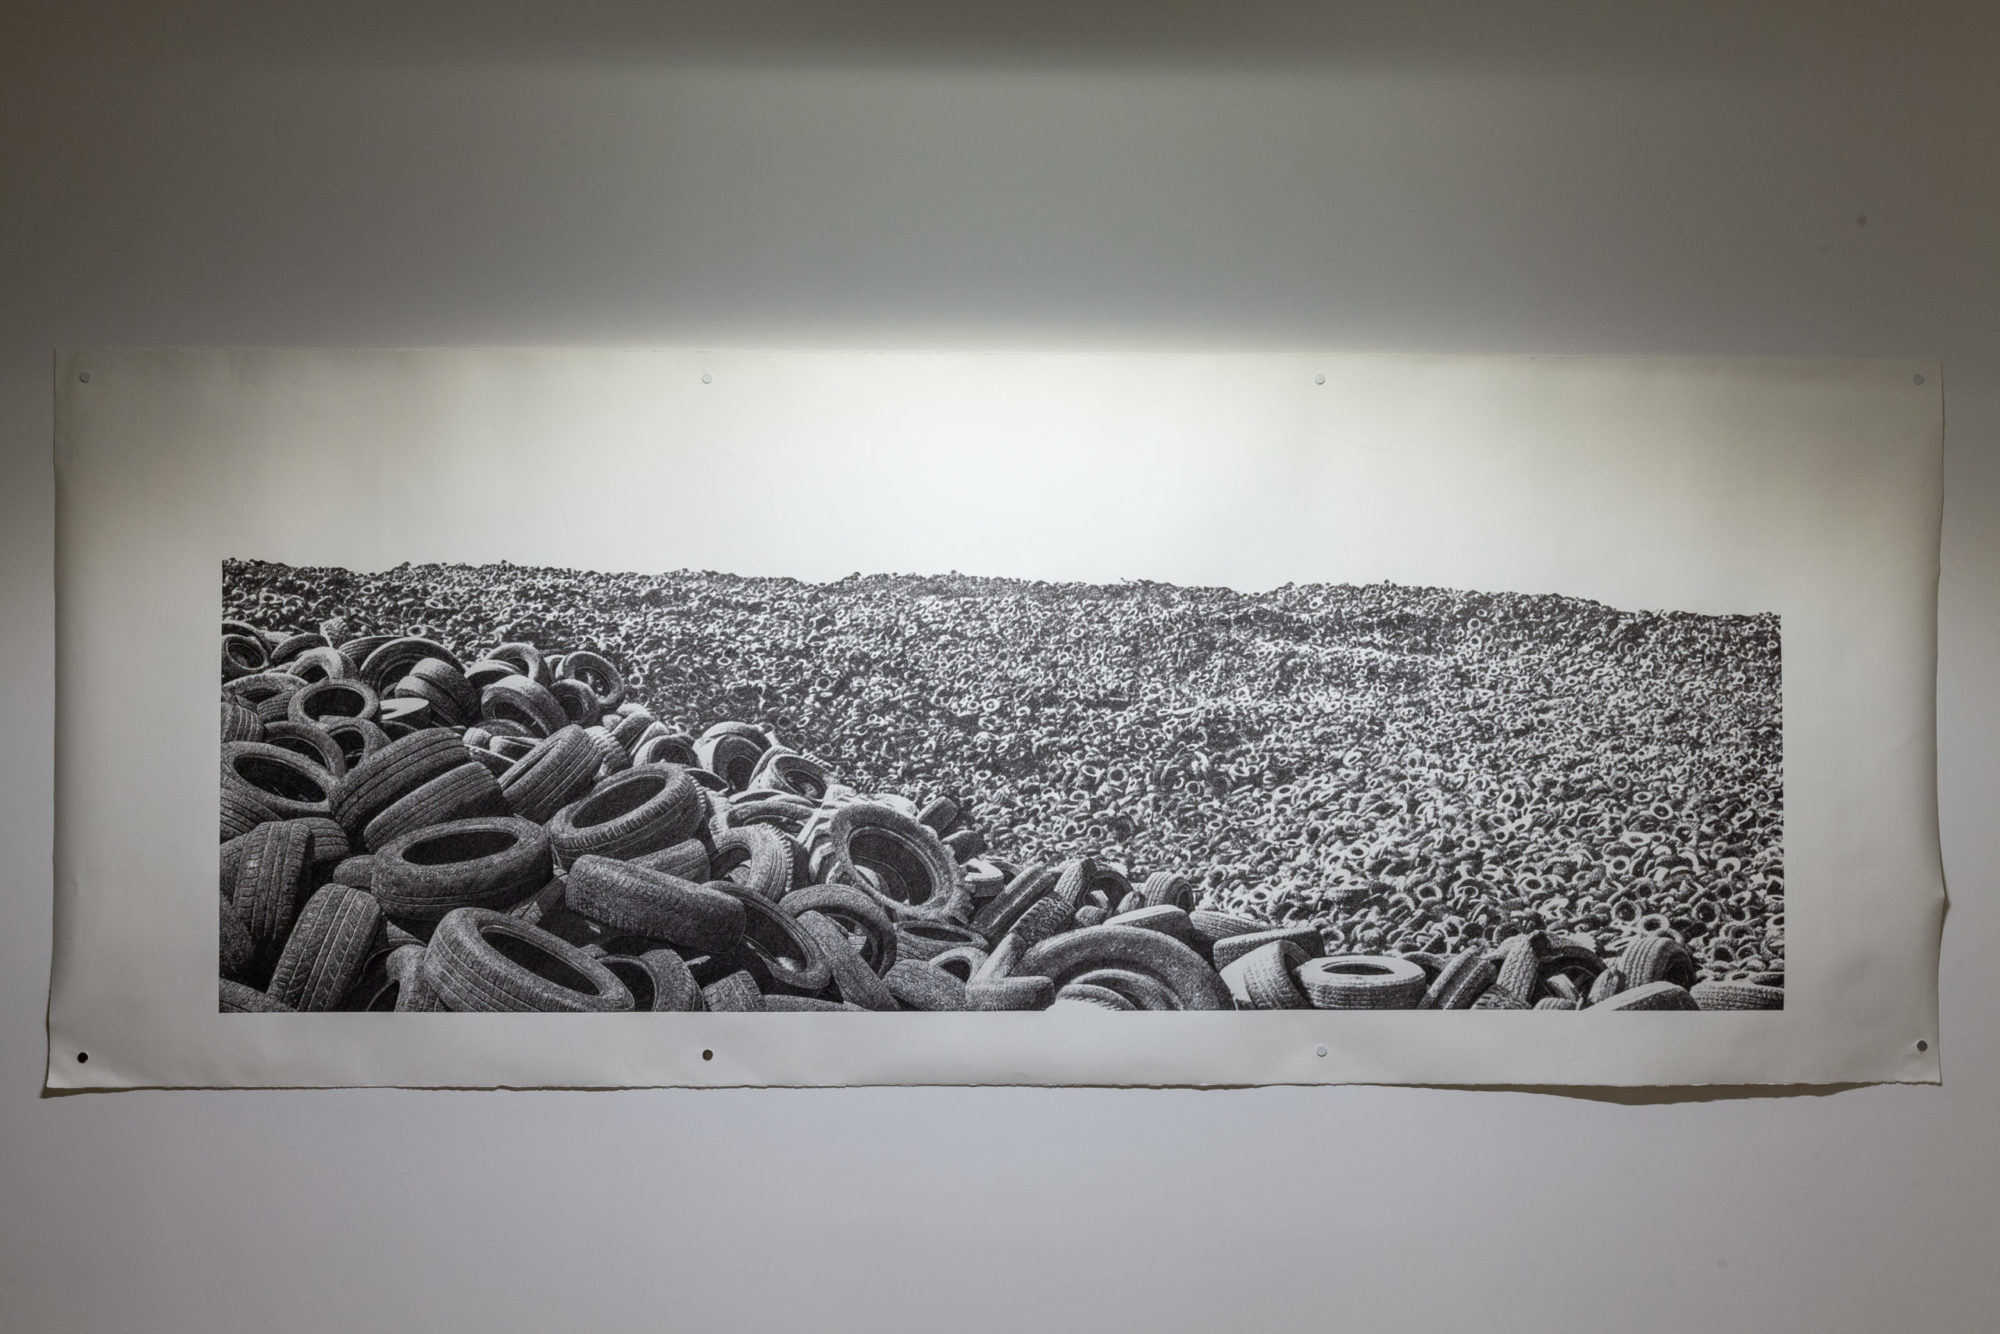 Installation view of a black and white photograph of used tires.